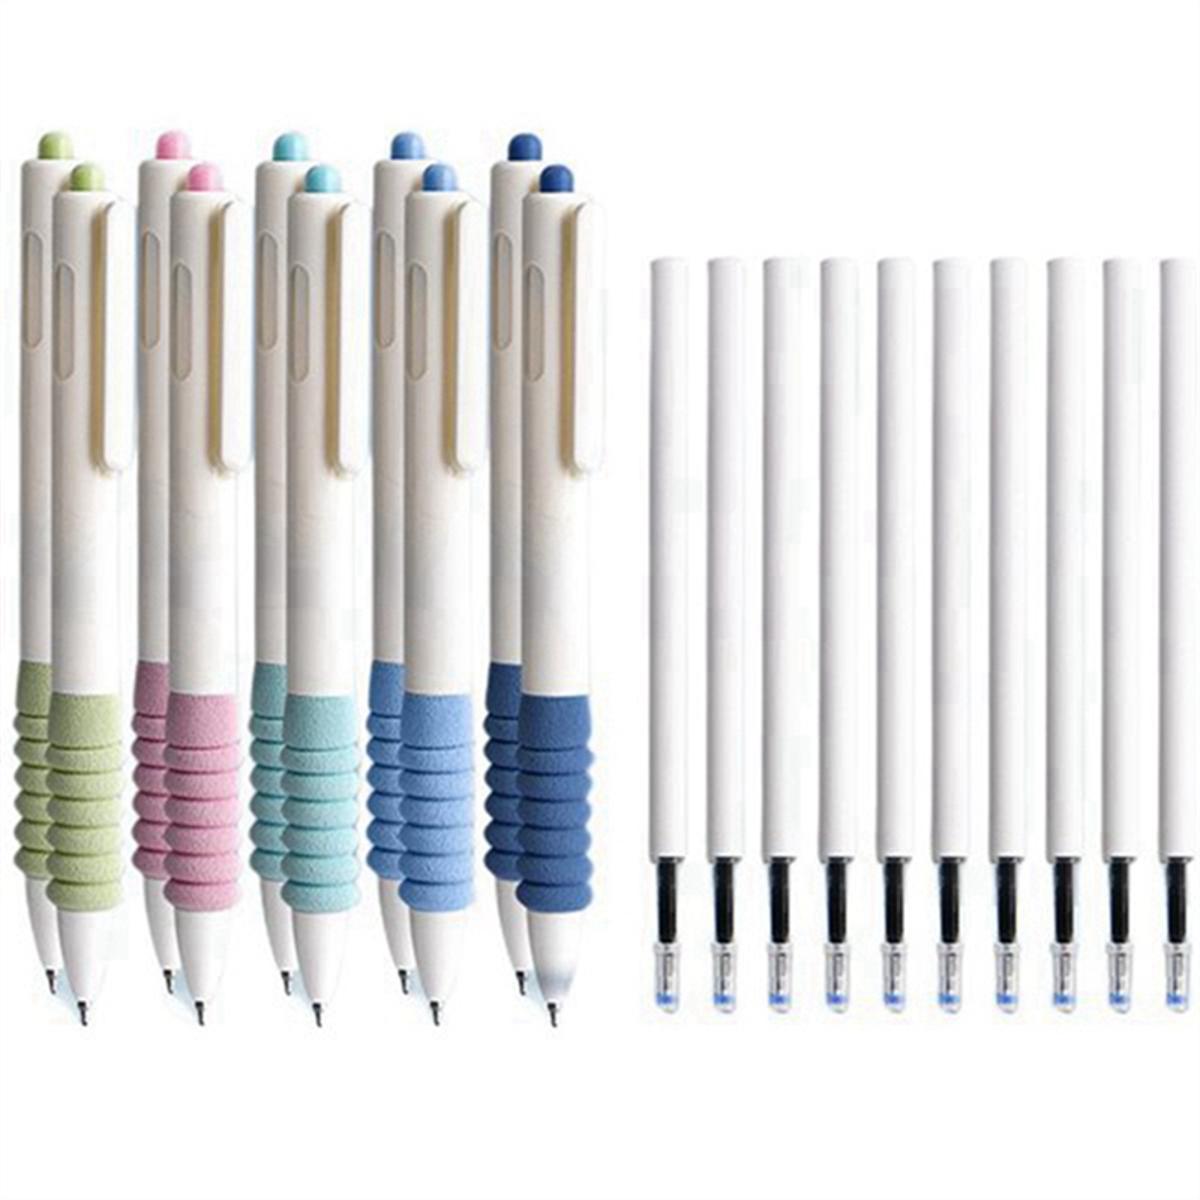 4 Pieces Heat Erasable Fabric Marking Pens Heat Erase Pens with 48 Refills  for Quilting Sewing and Dressmaking 